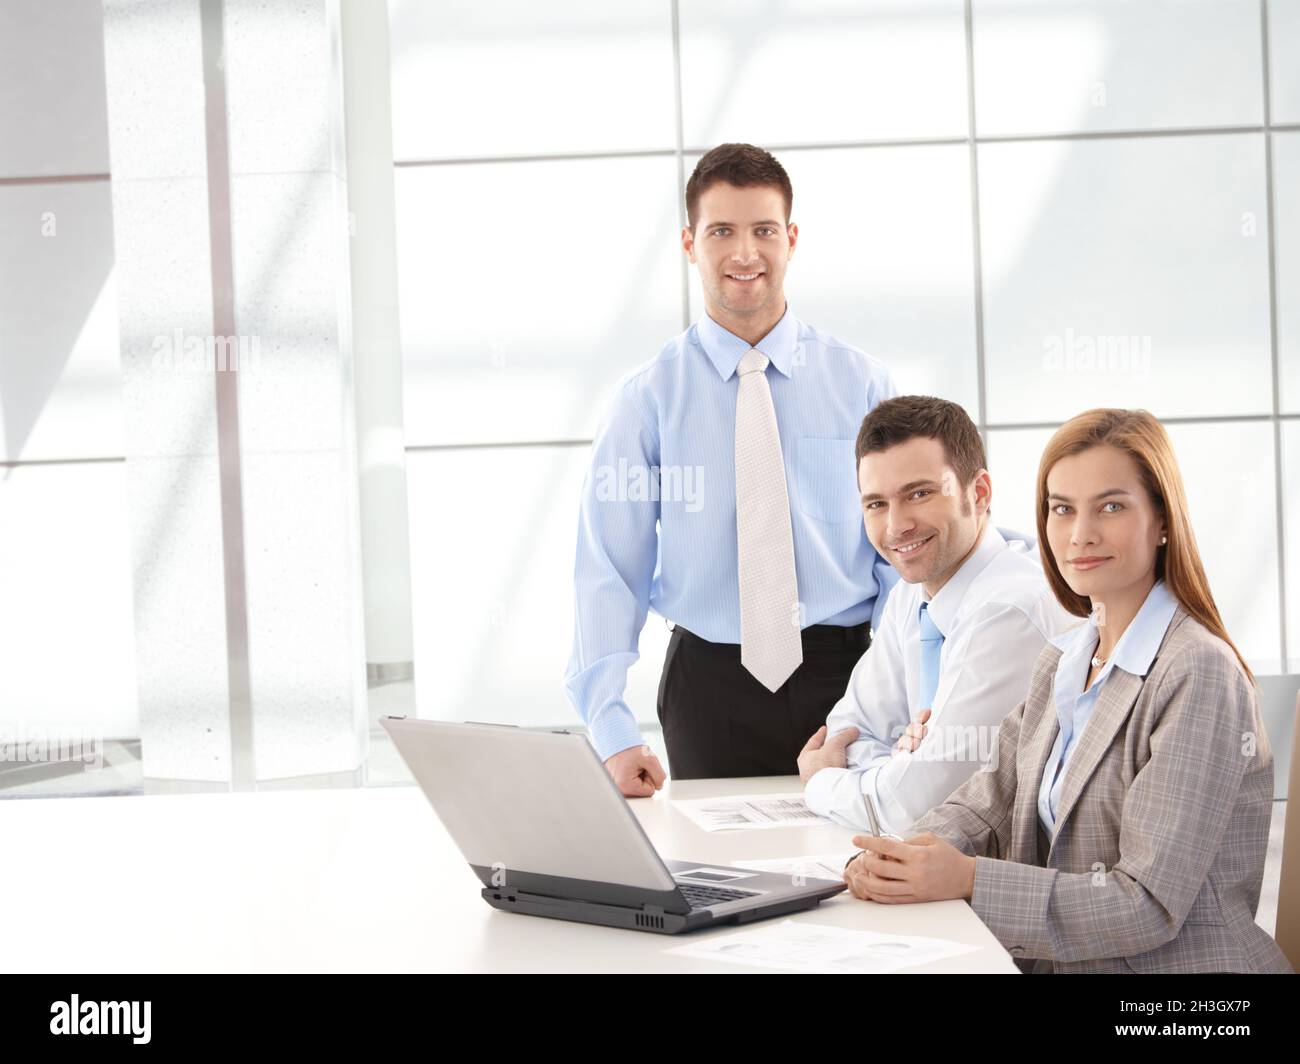 Successful businessteam smiling happily Stock Photo